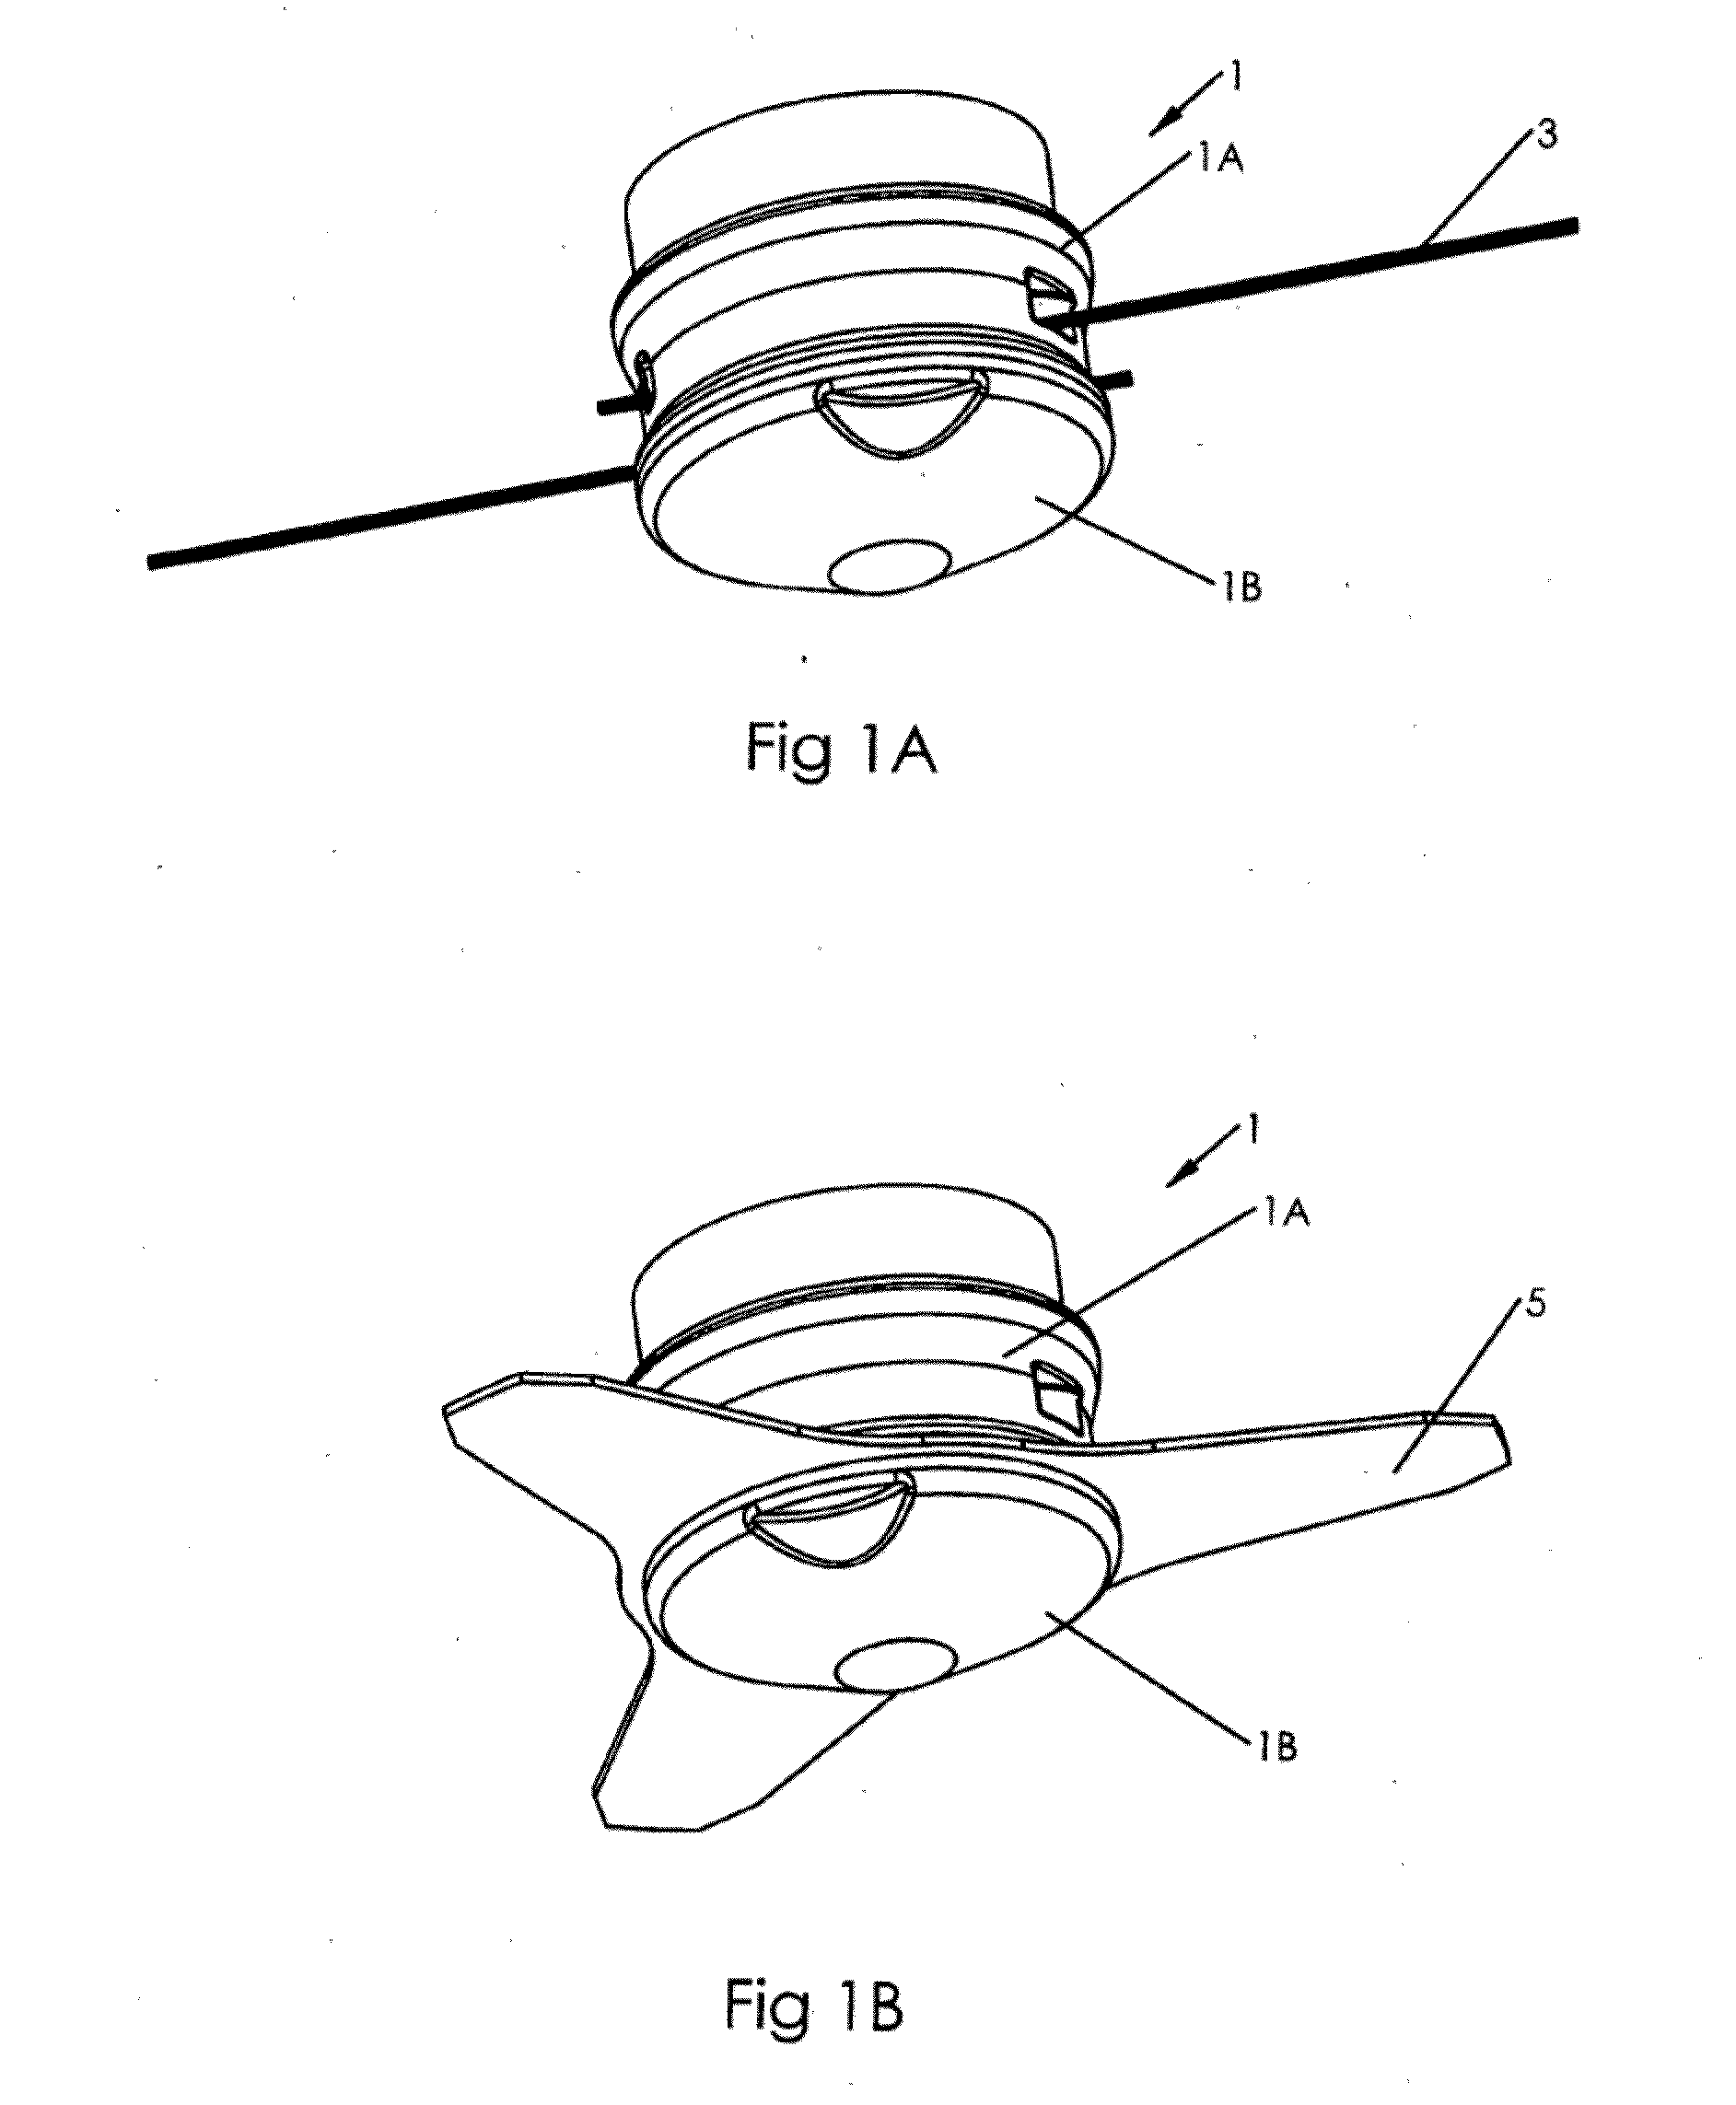 Multifunctional rotary cutting head for cutting devices, and portable devices comprising such a cutting head